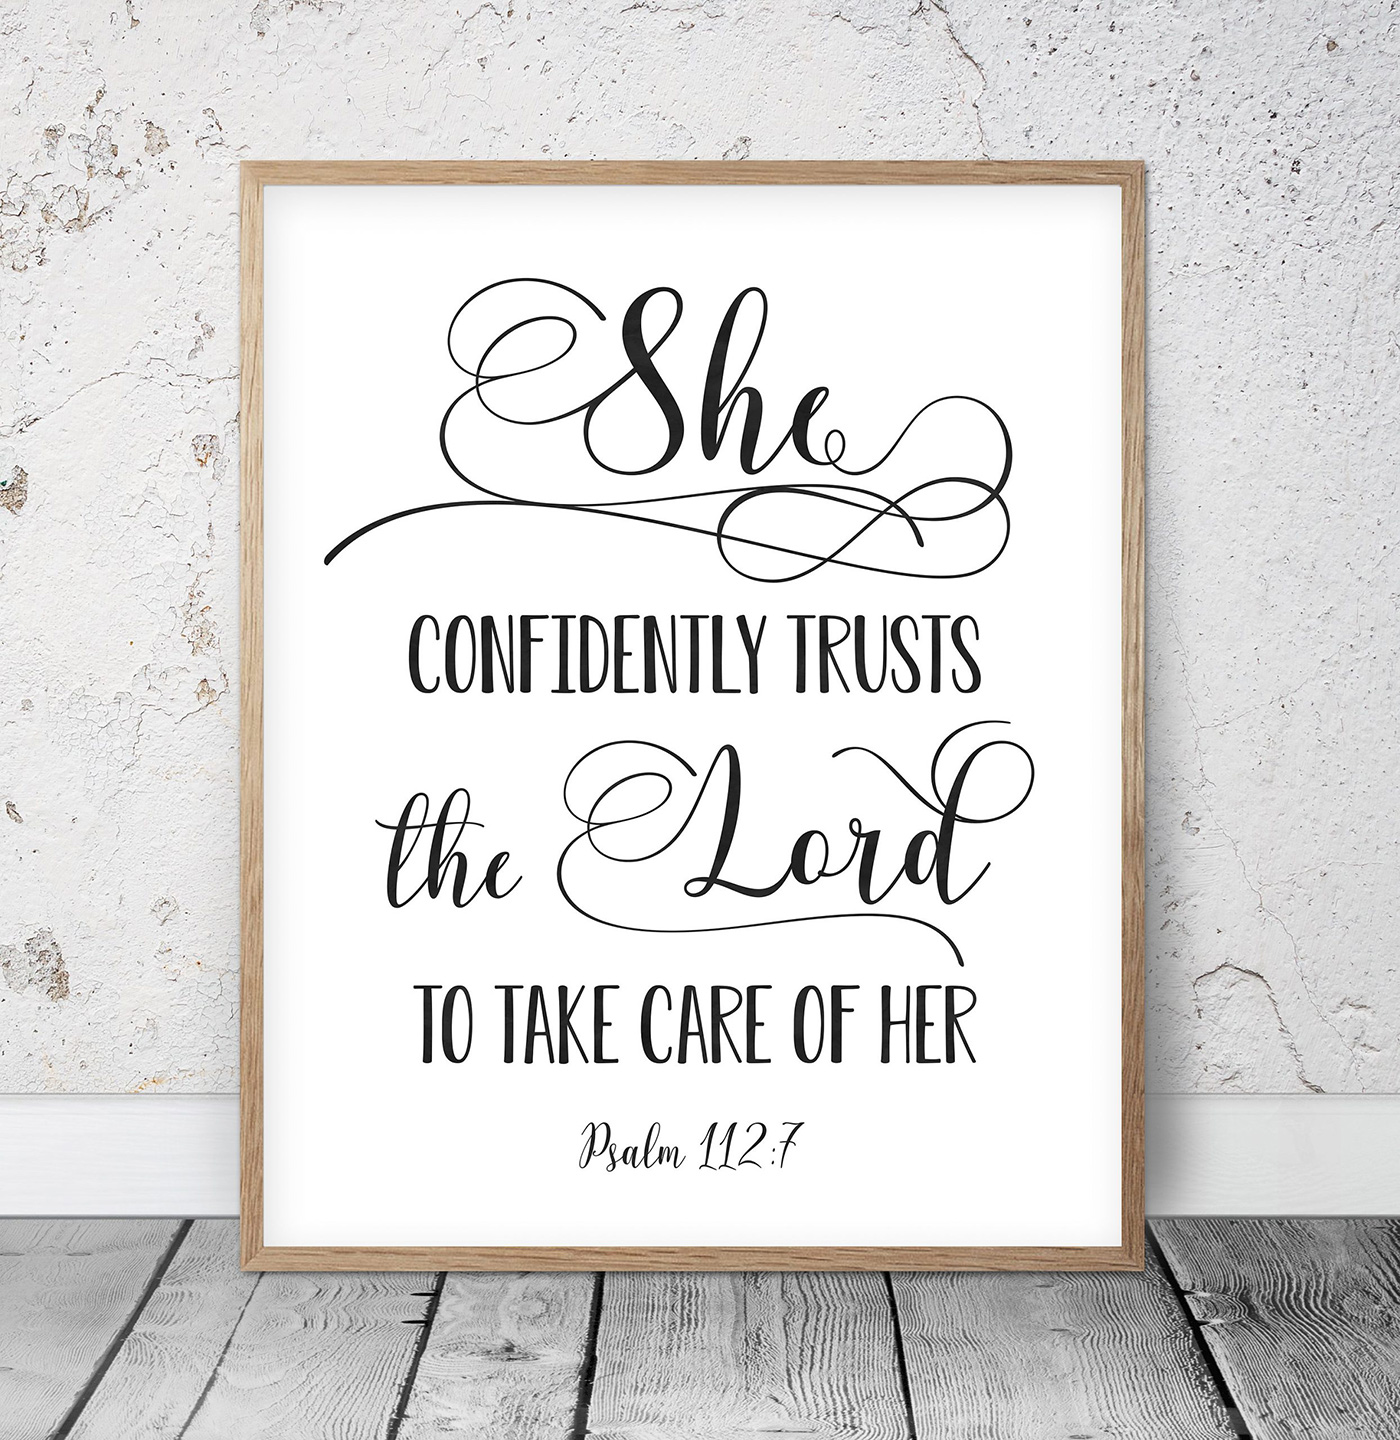 She Confidently Trusts The Lord, Psalm 112:7 Bible Verse Printable Wall Art,Nursery Bible Quotes